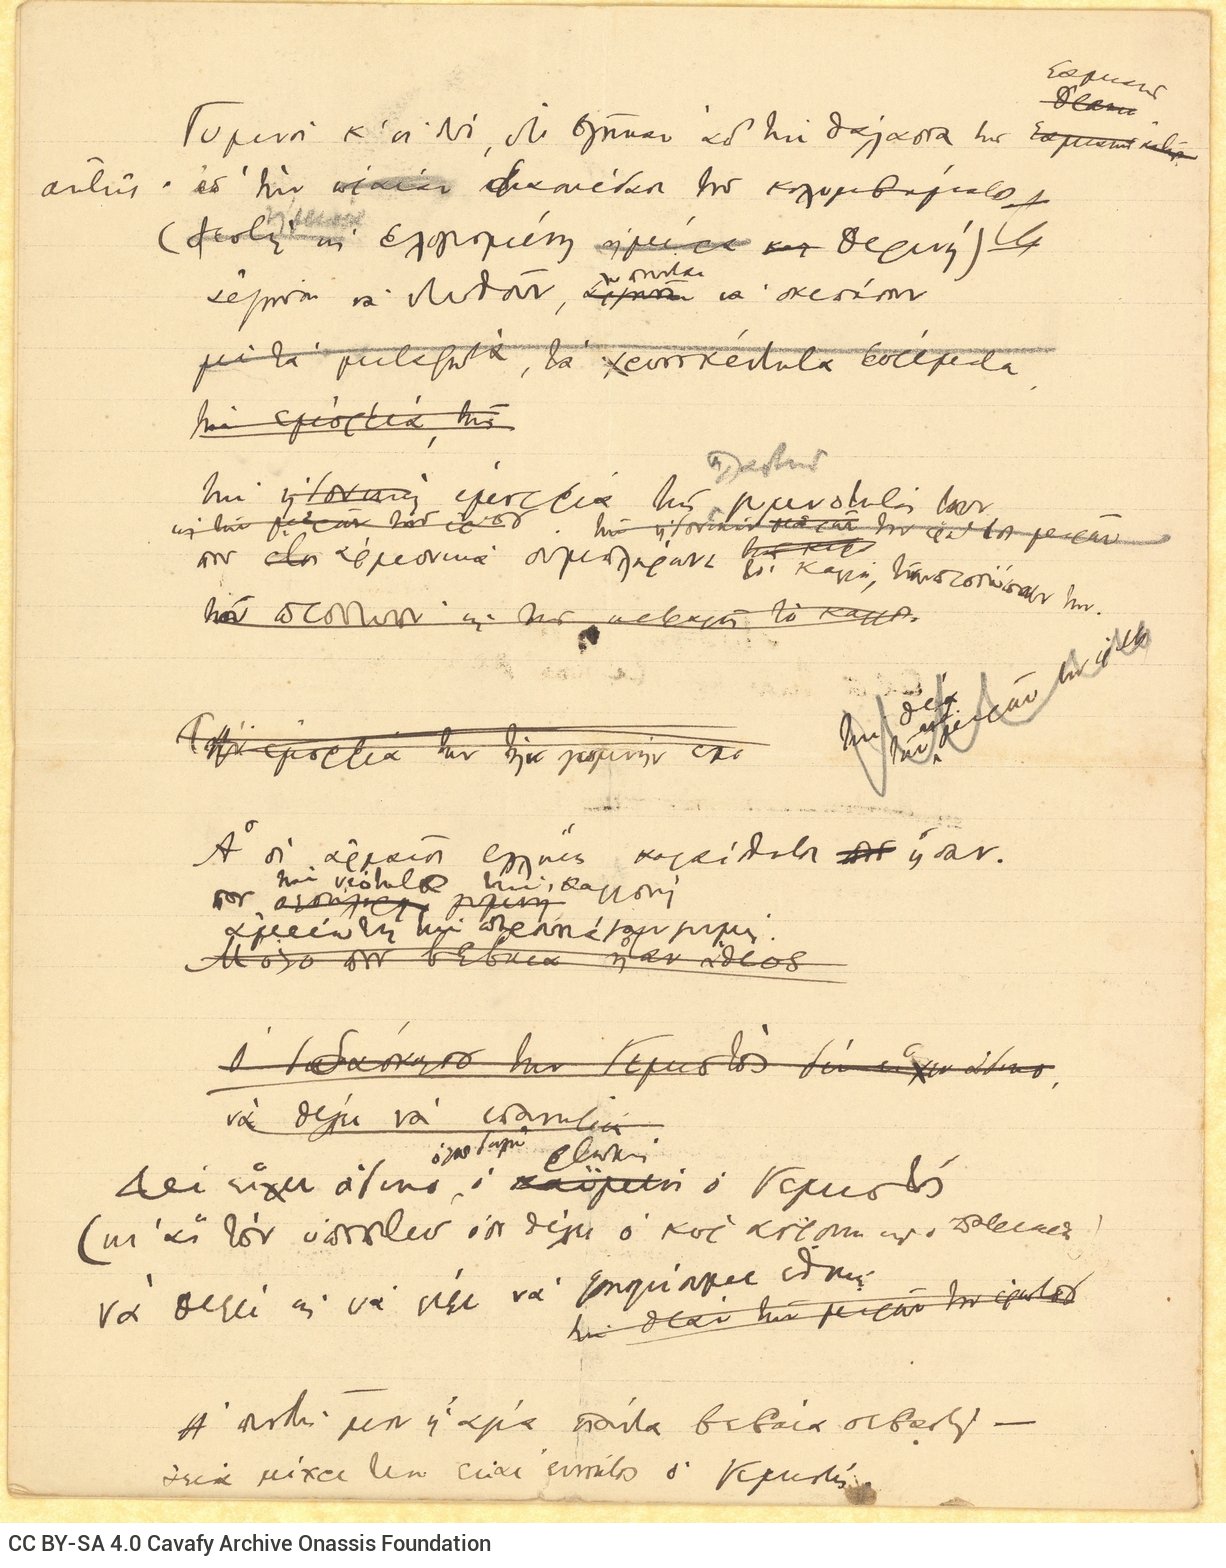 Handwritten draft of the poem "After the Swim" on the second and third pages of a ruled double sheet notepaper. Cancellati